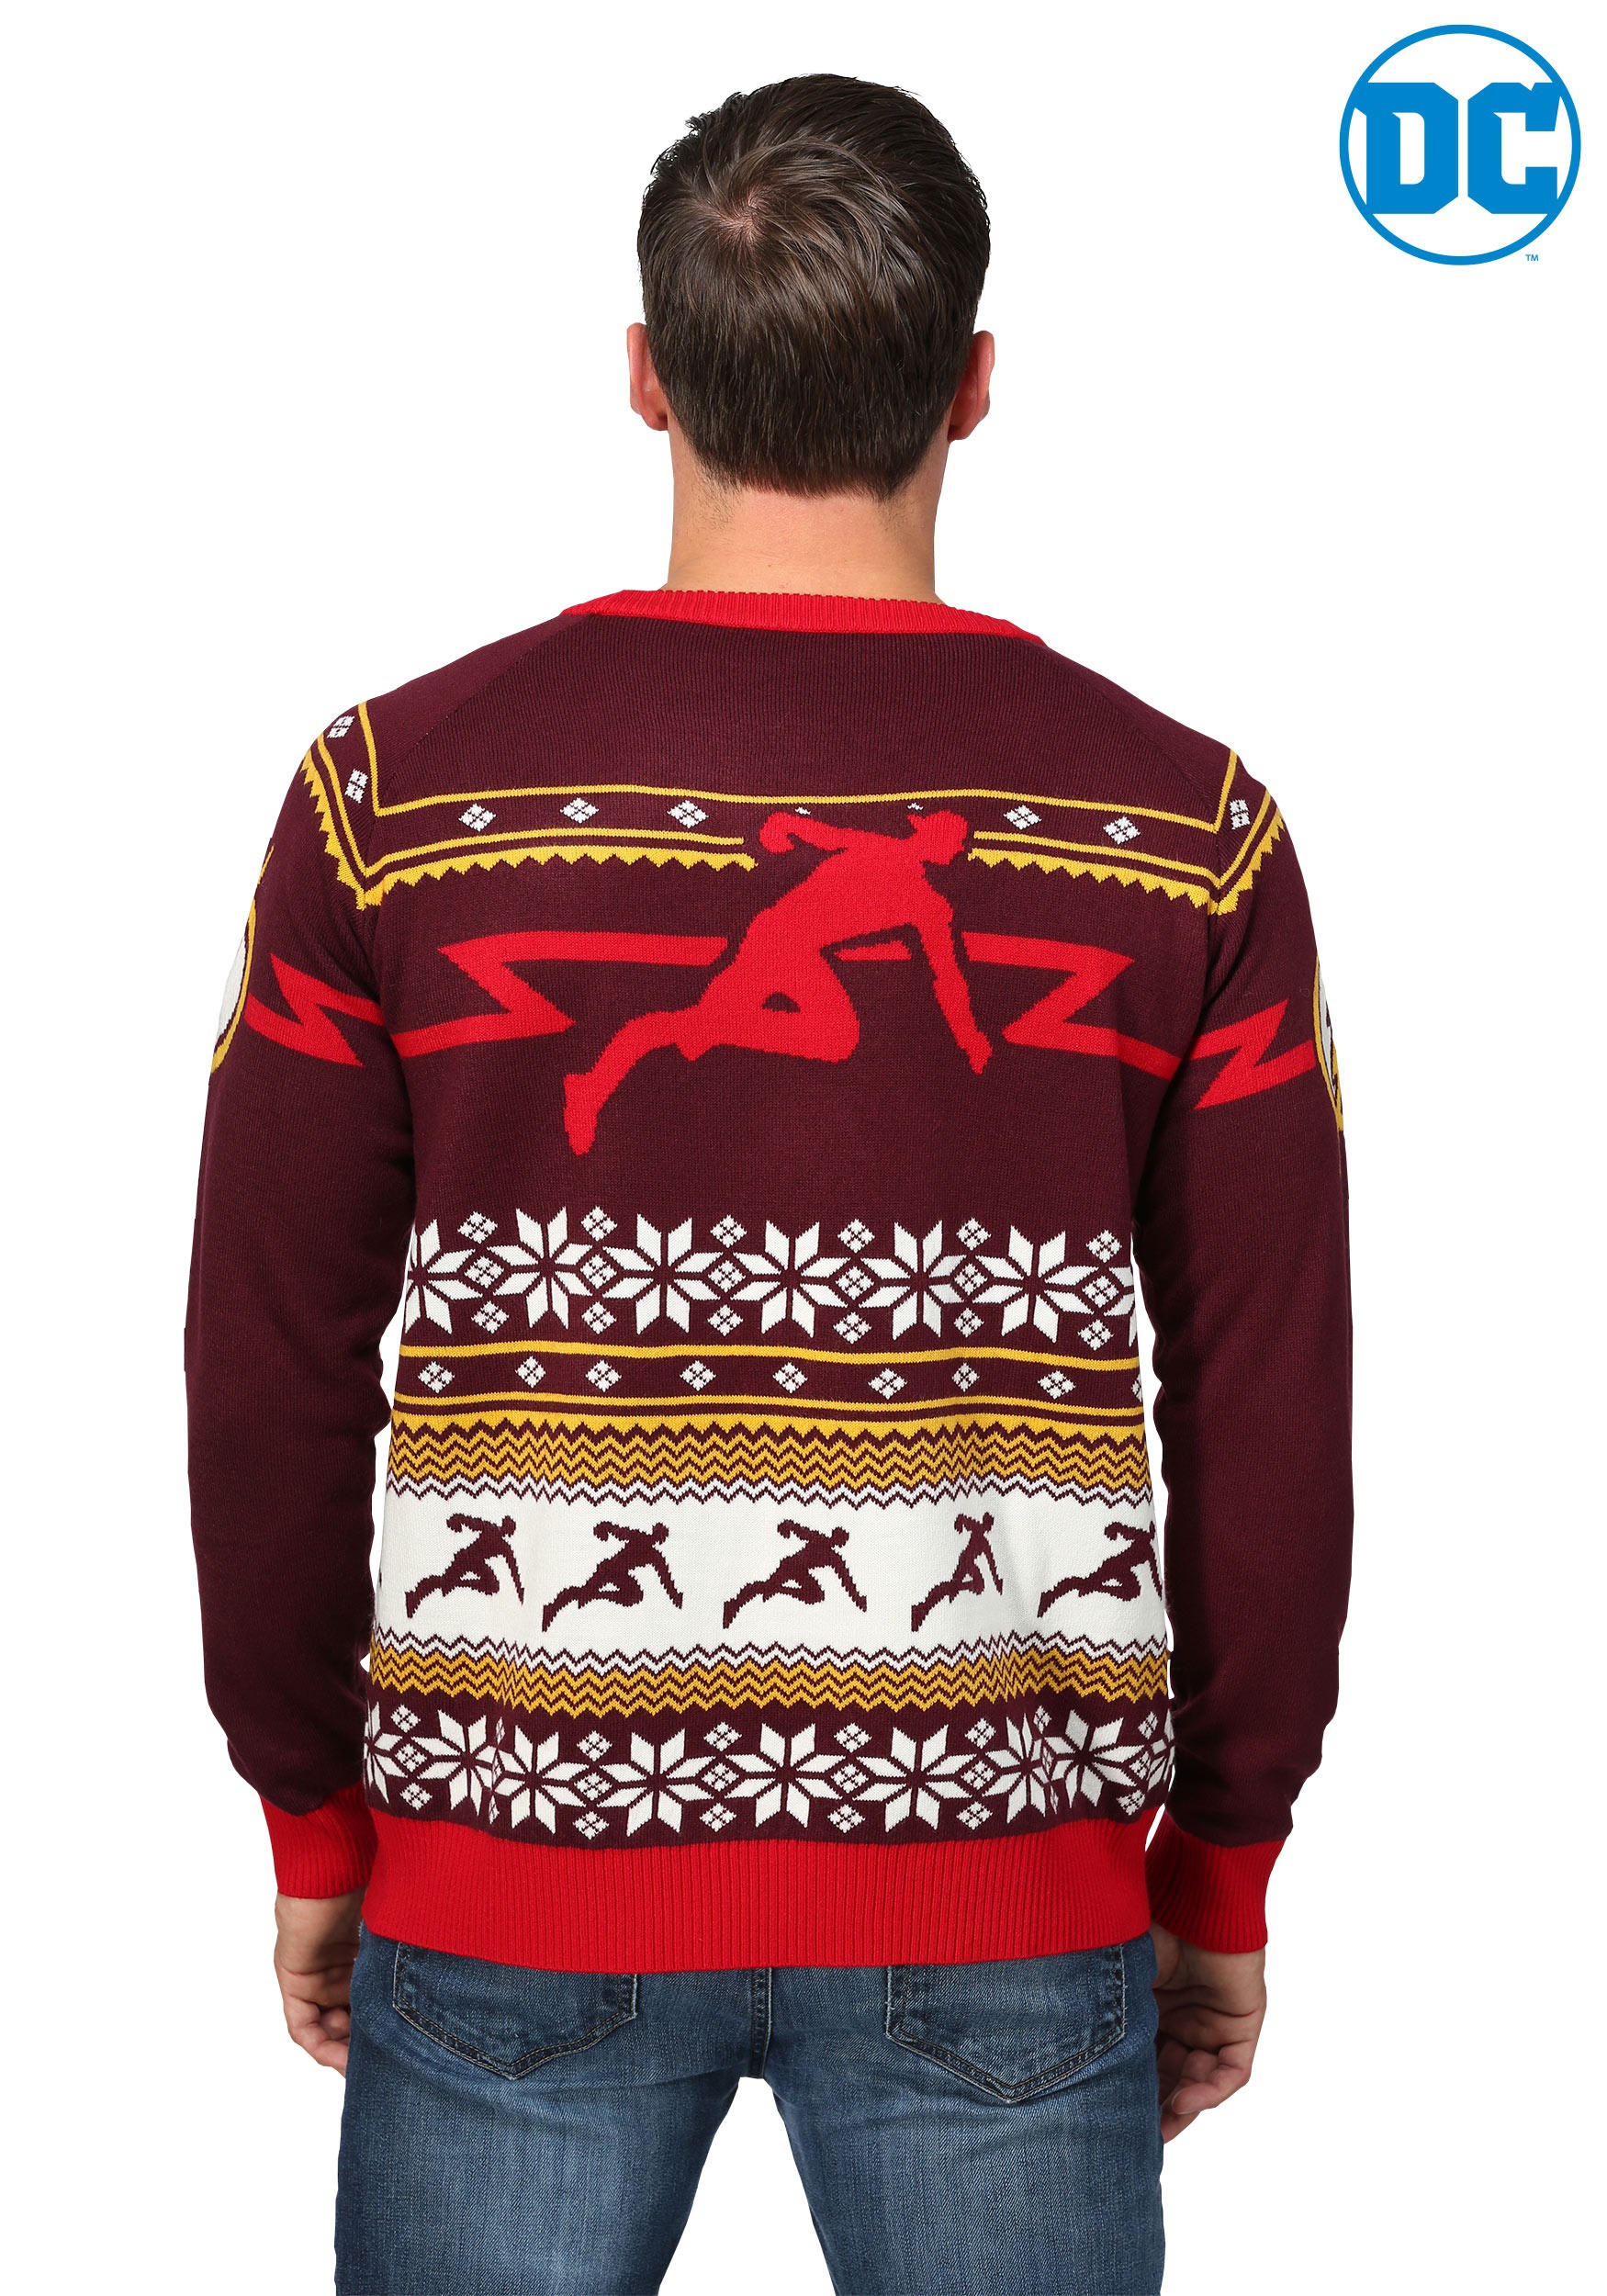 Flash Logo Ugly Christmas Sweater For Men